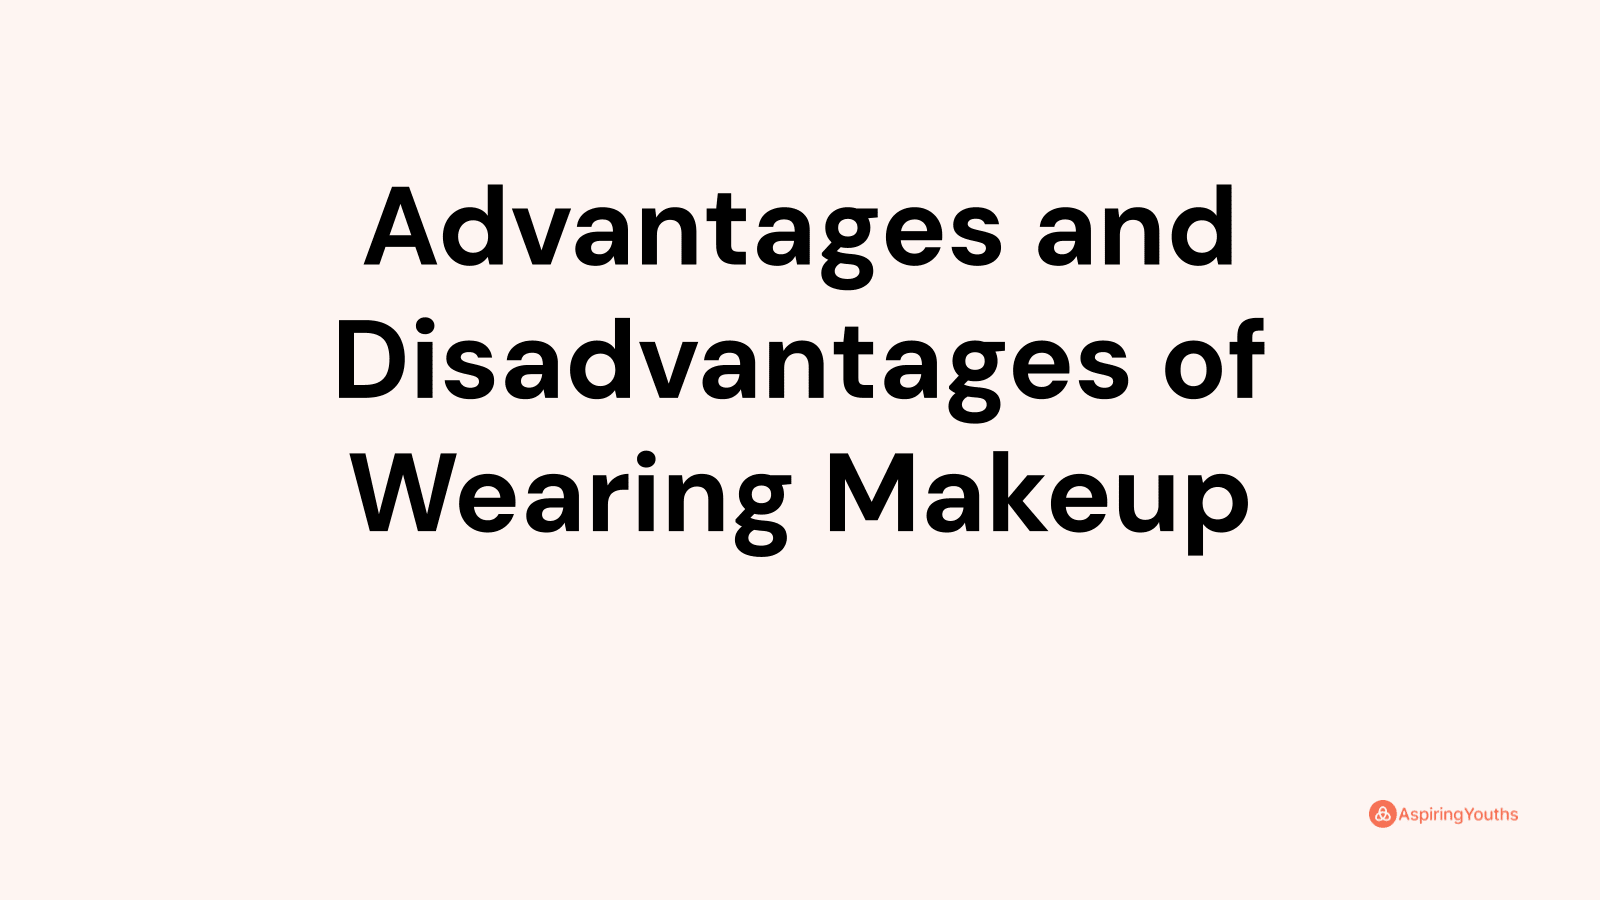 Advantages and disadvantages of Wearing Makeup